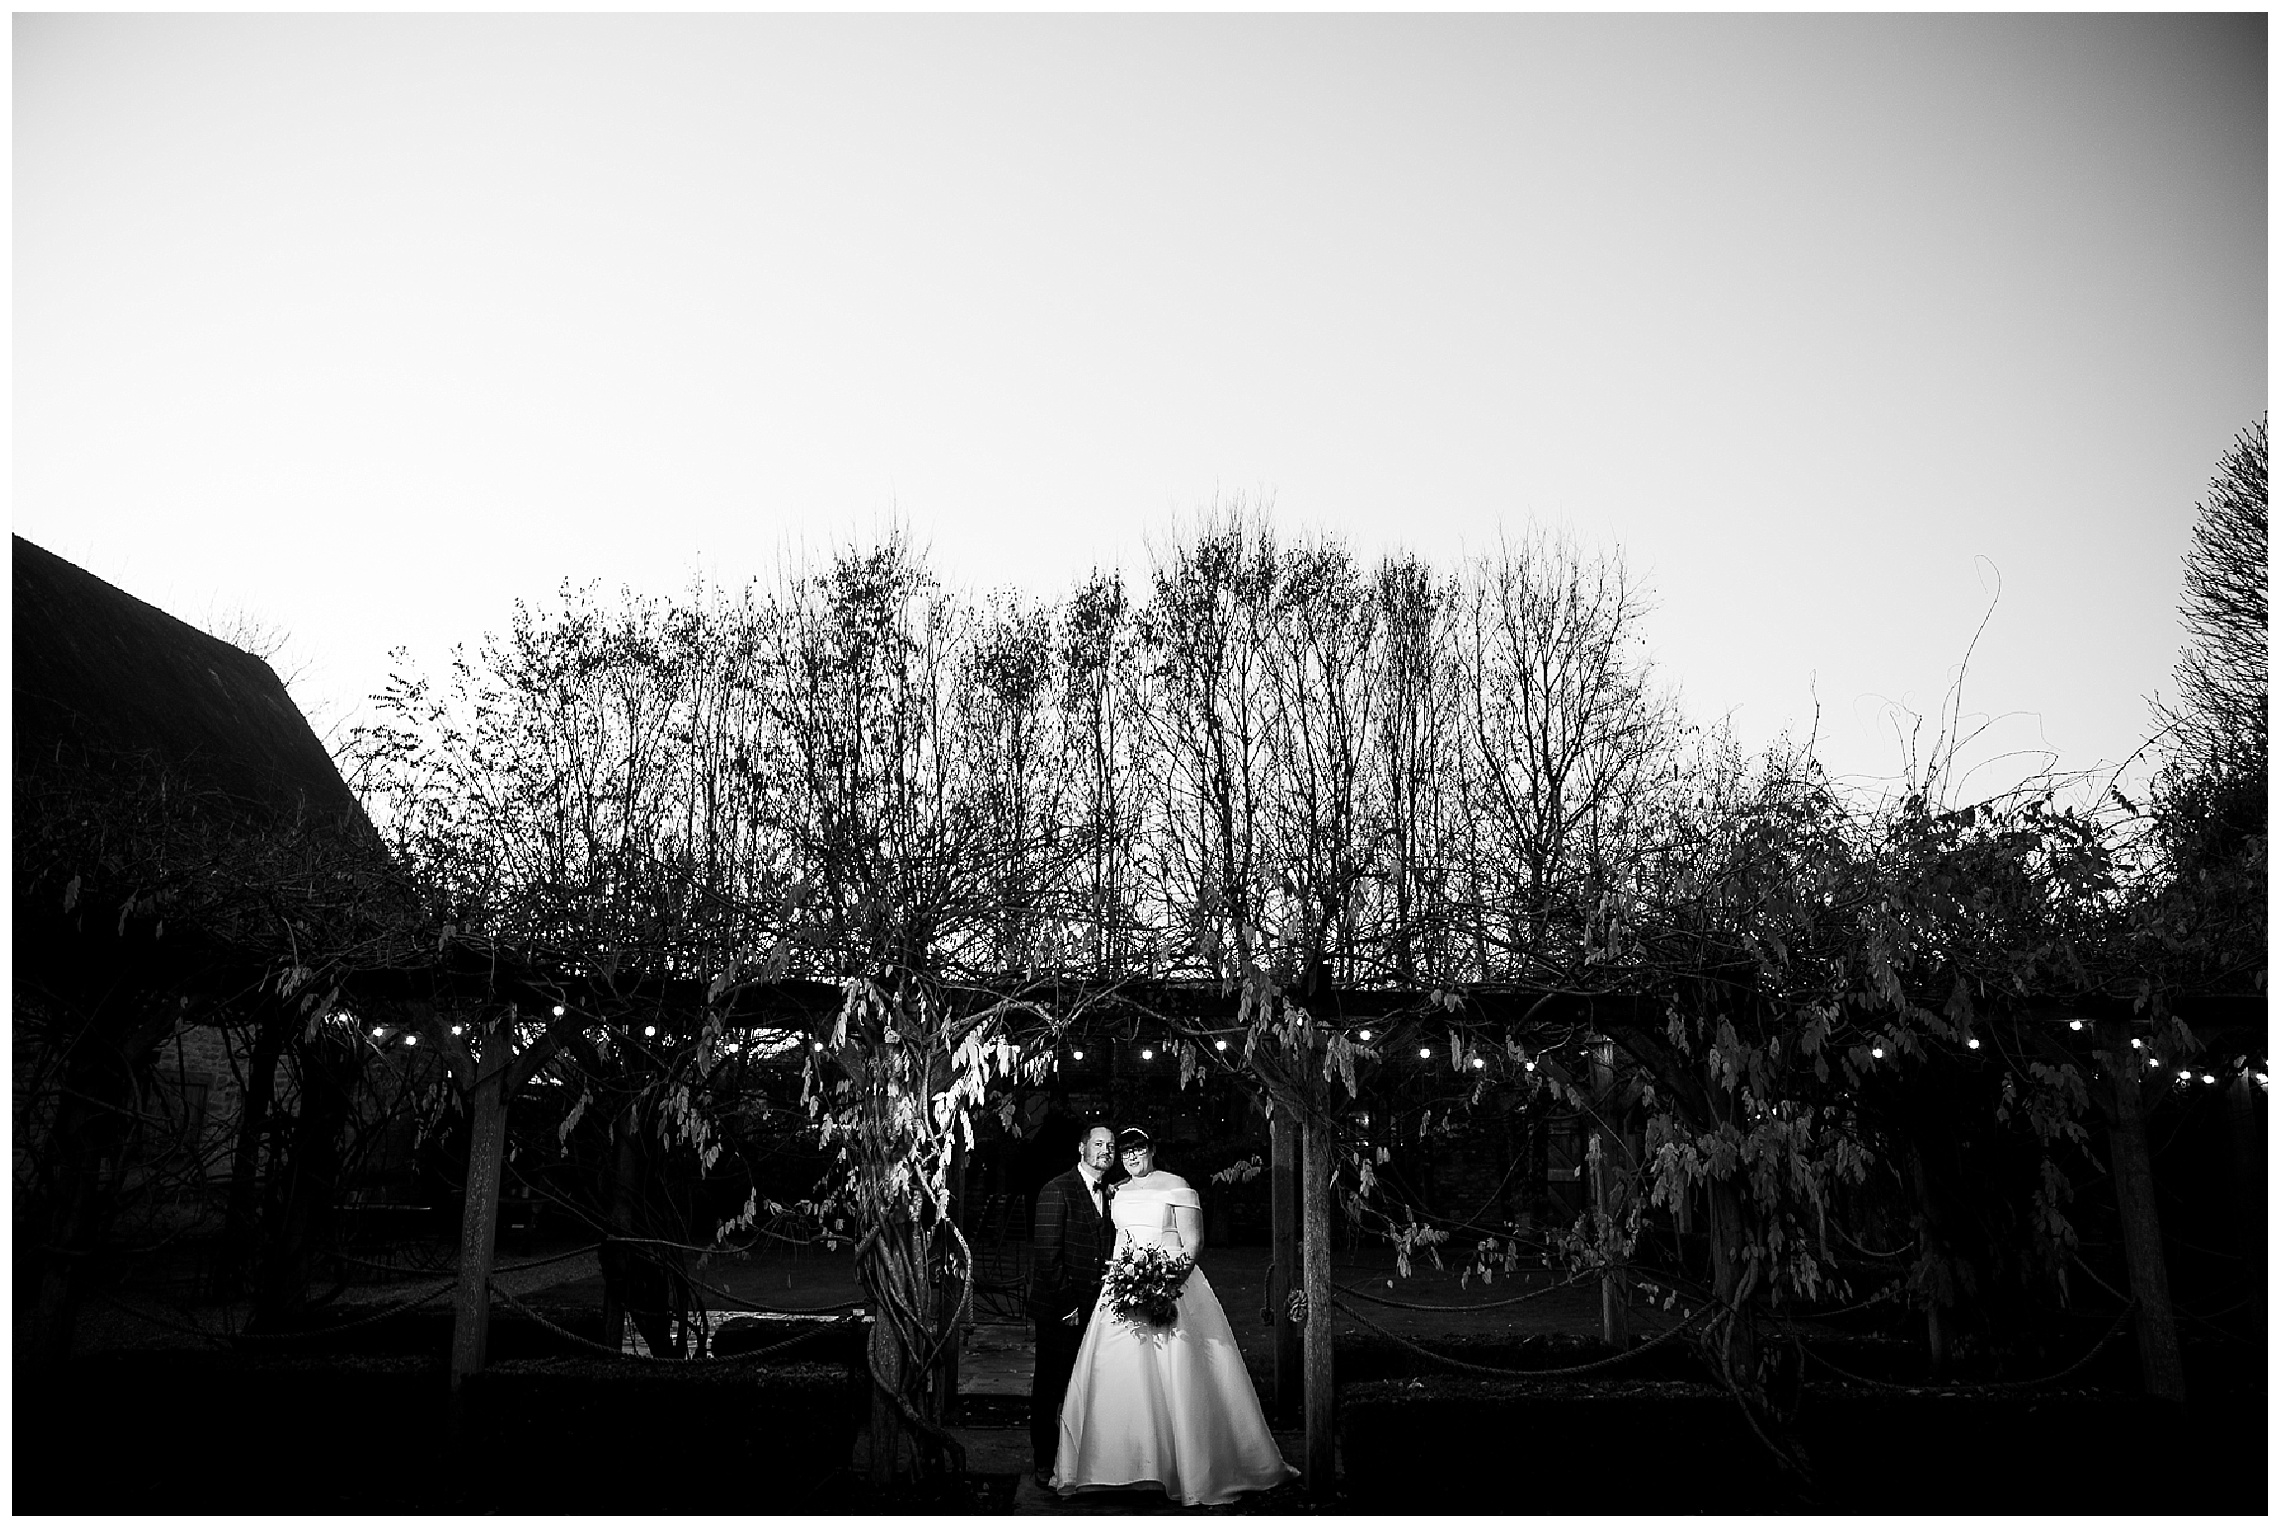 bride and groom in low light outside under canopy of plants